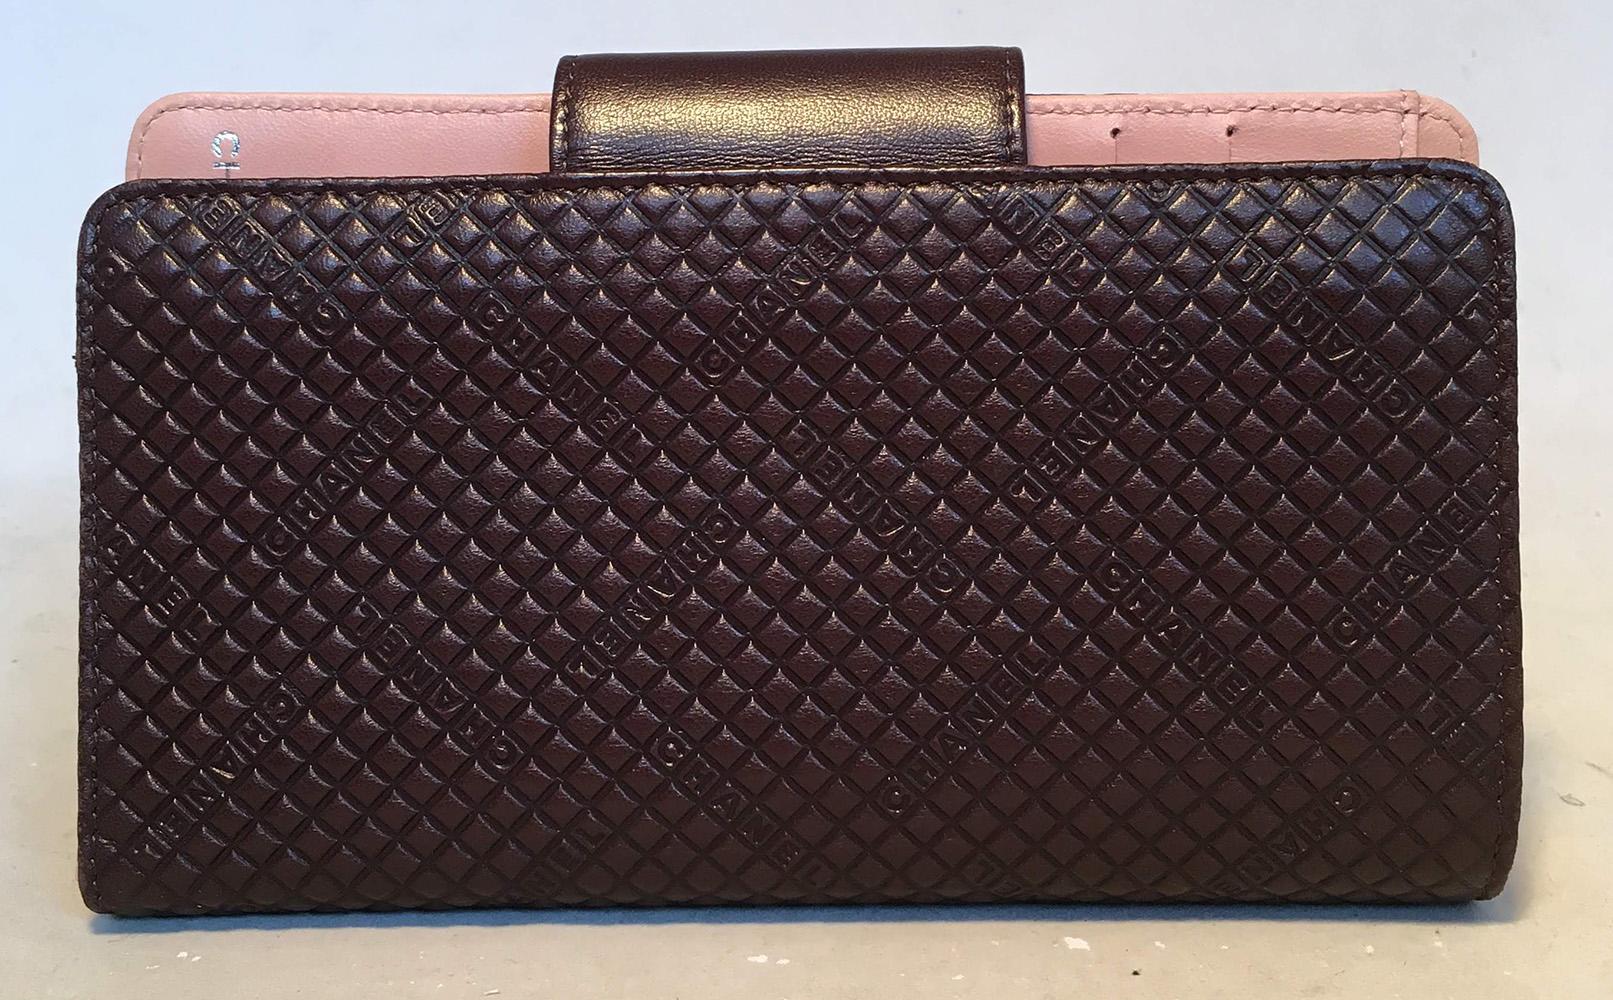 Chanel Brown and Pink Leather Embossed Wallet in excellent condition. Brown leather embossed with a unique square pattern and chanel throughout trimmed with pink leather and CC logo along snap strap closure. Pink leather interior with one coin